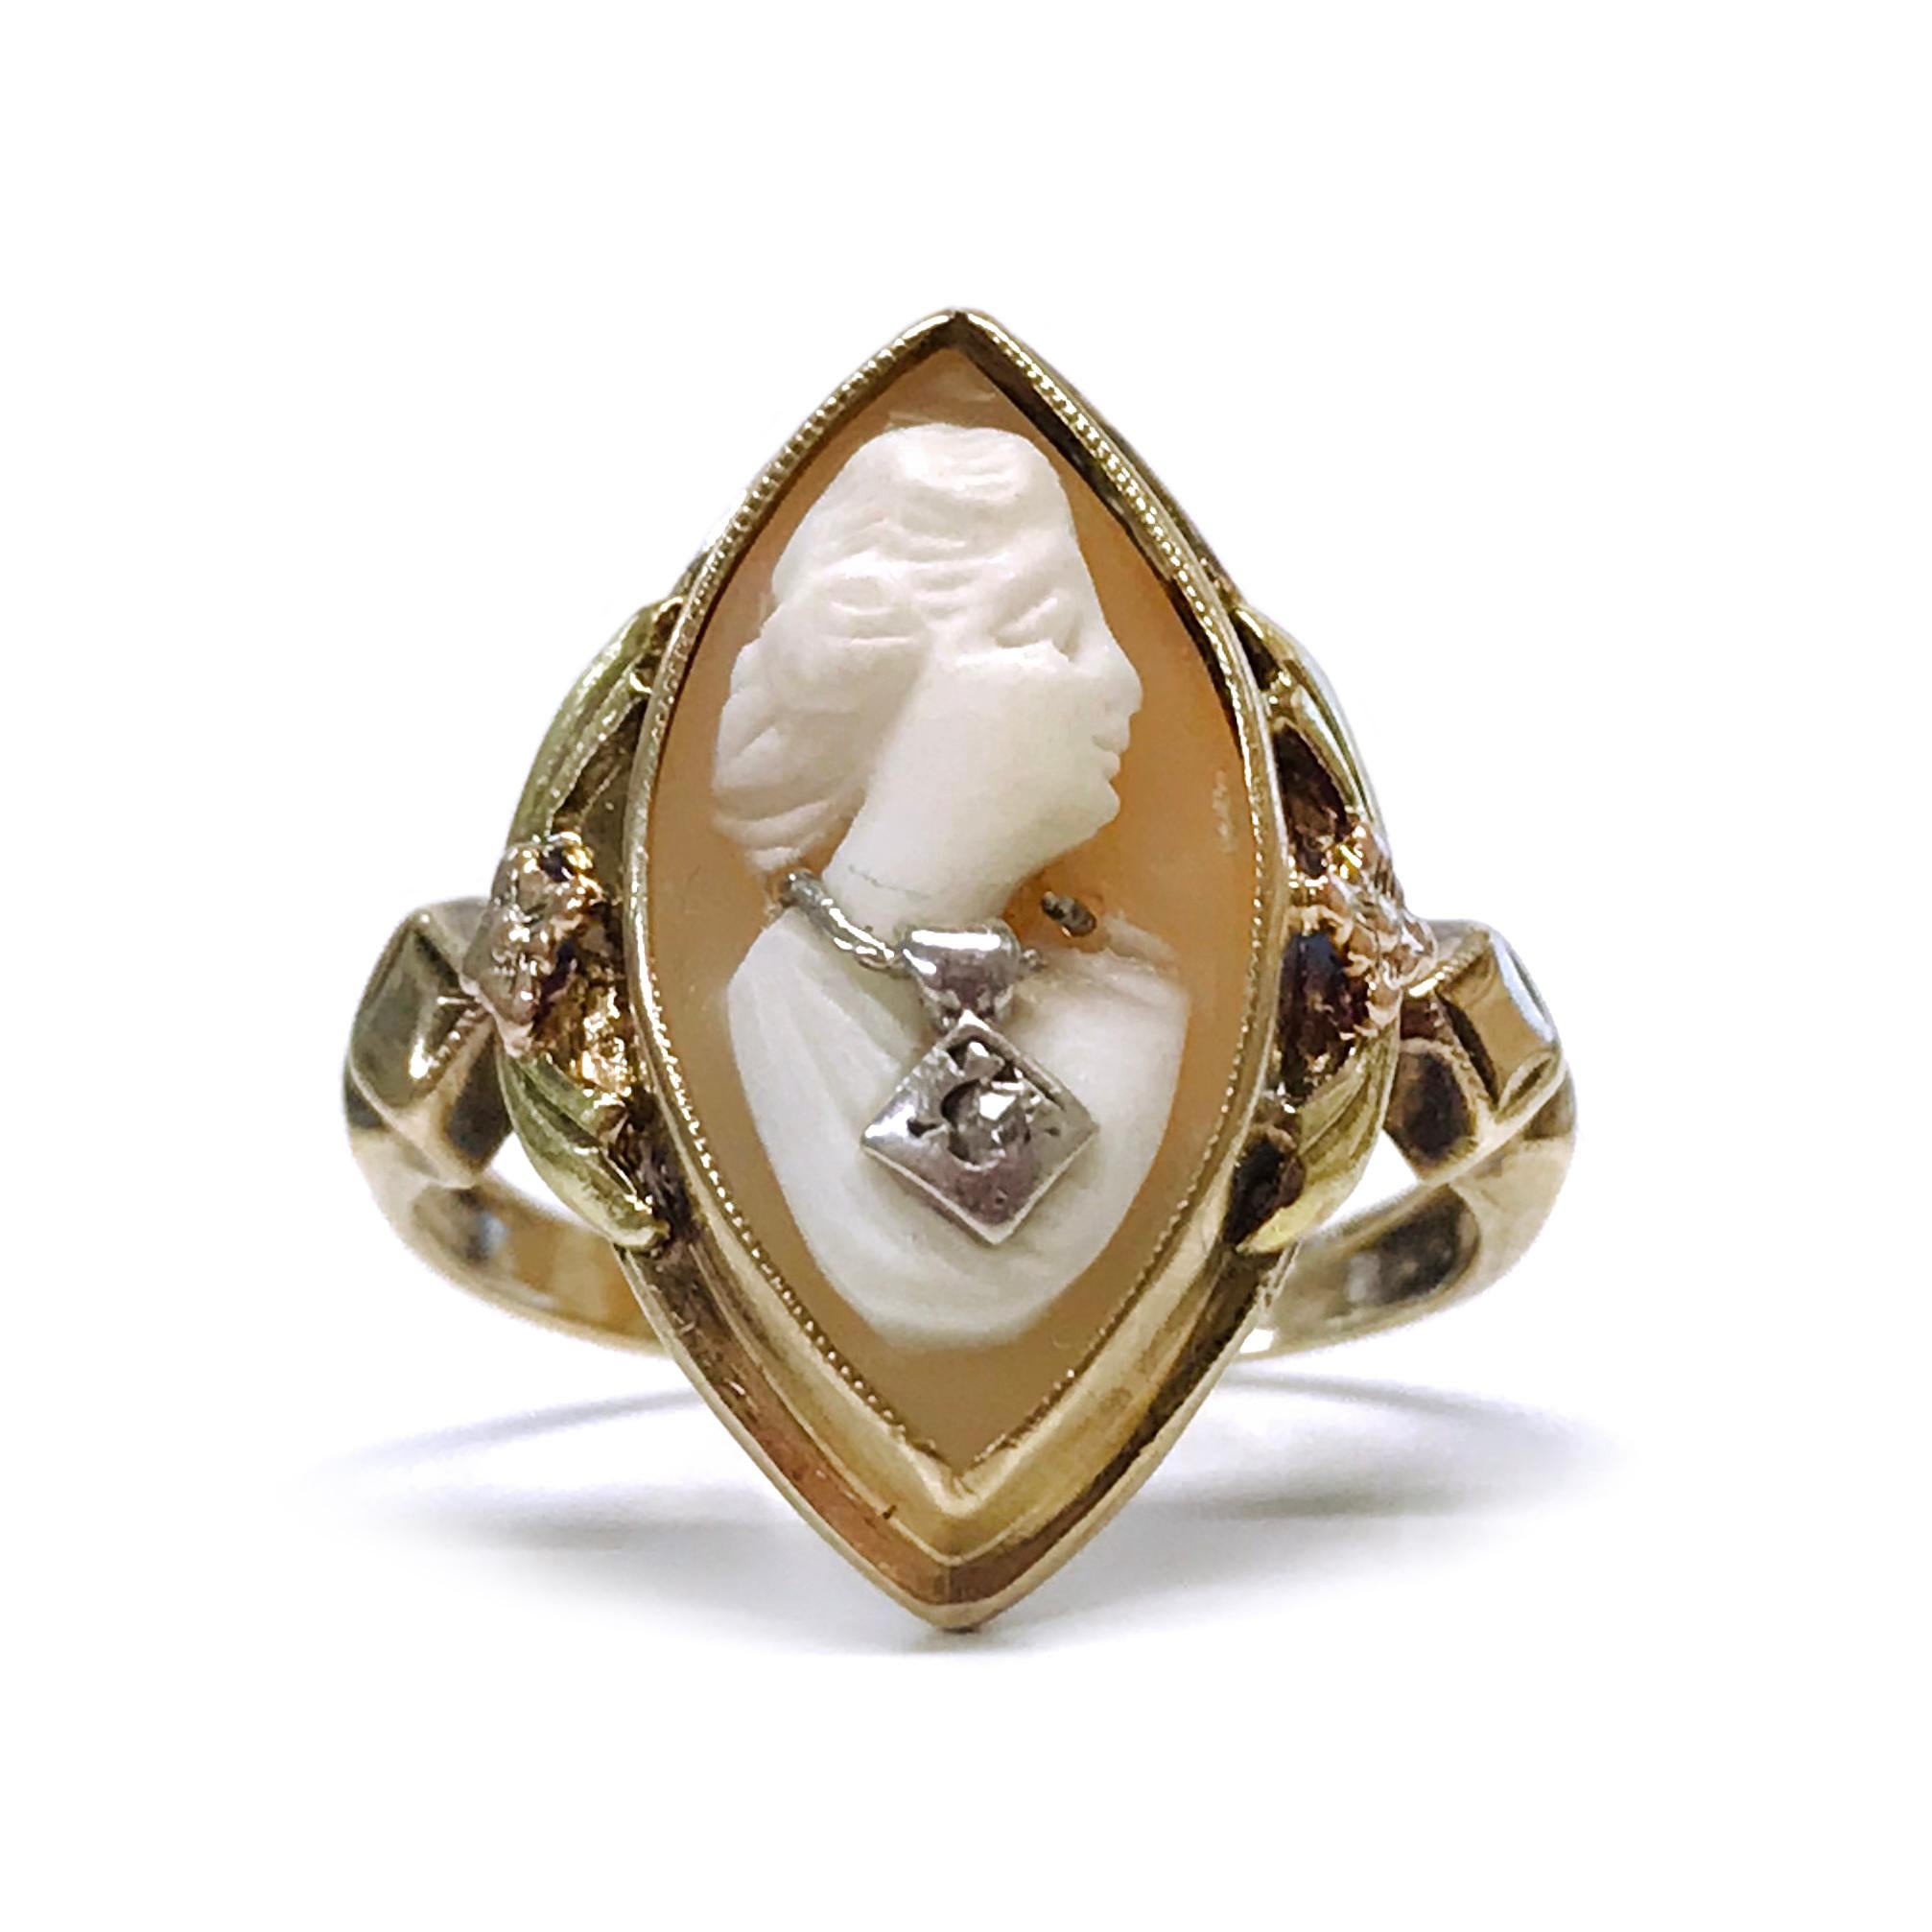 Art Deco 10 Karat Tri-Tone Yellow, Rose, and White Gold Cameo Diamond Ring. The navette-shaped ring has a bezel-set cameo. The carved shell cameo is a profile of a woman wearing a white gold necklace, the necklace has a single round meller diamond